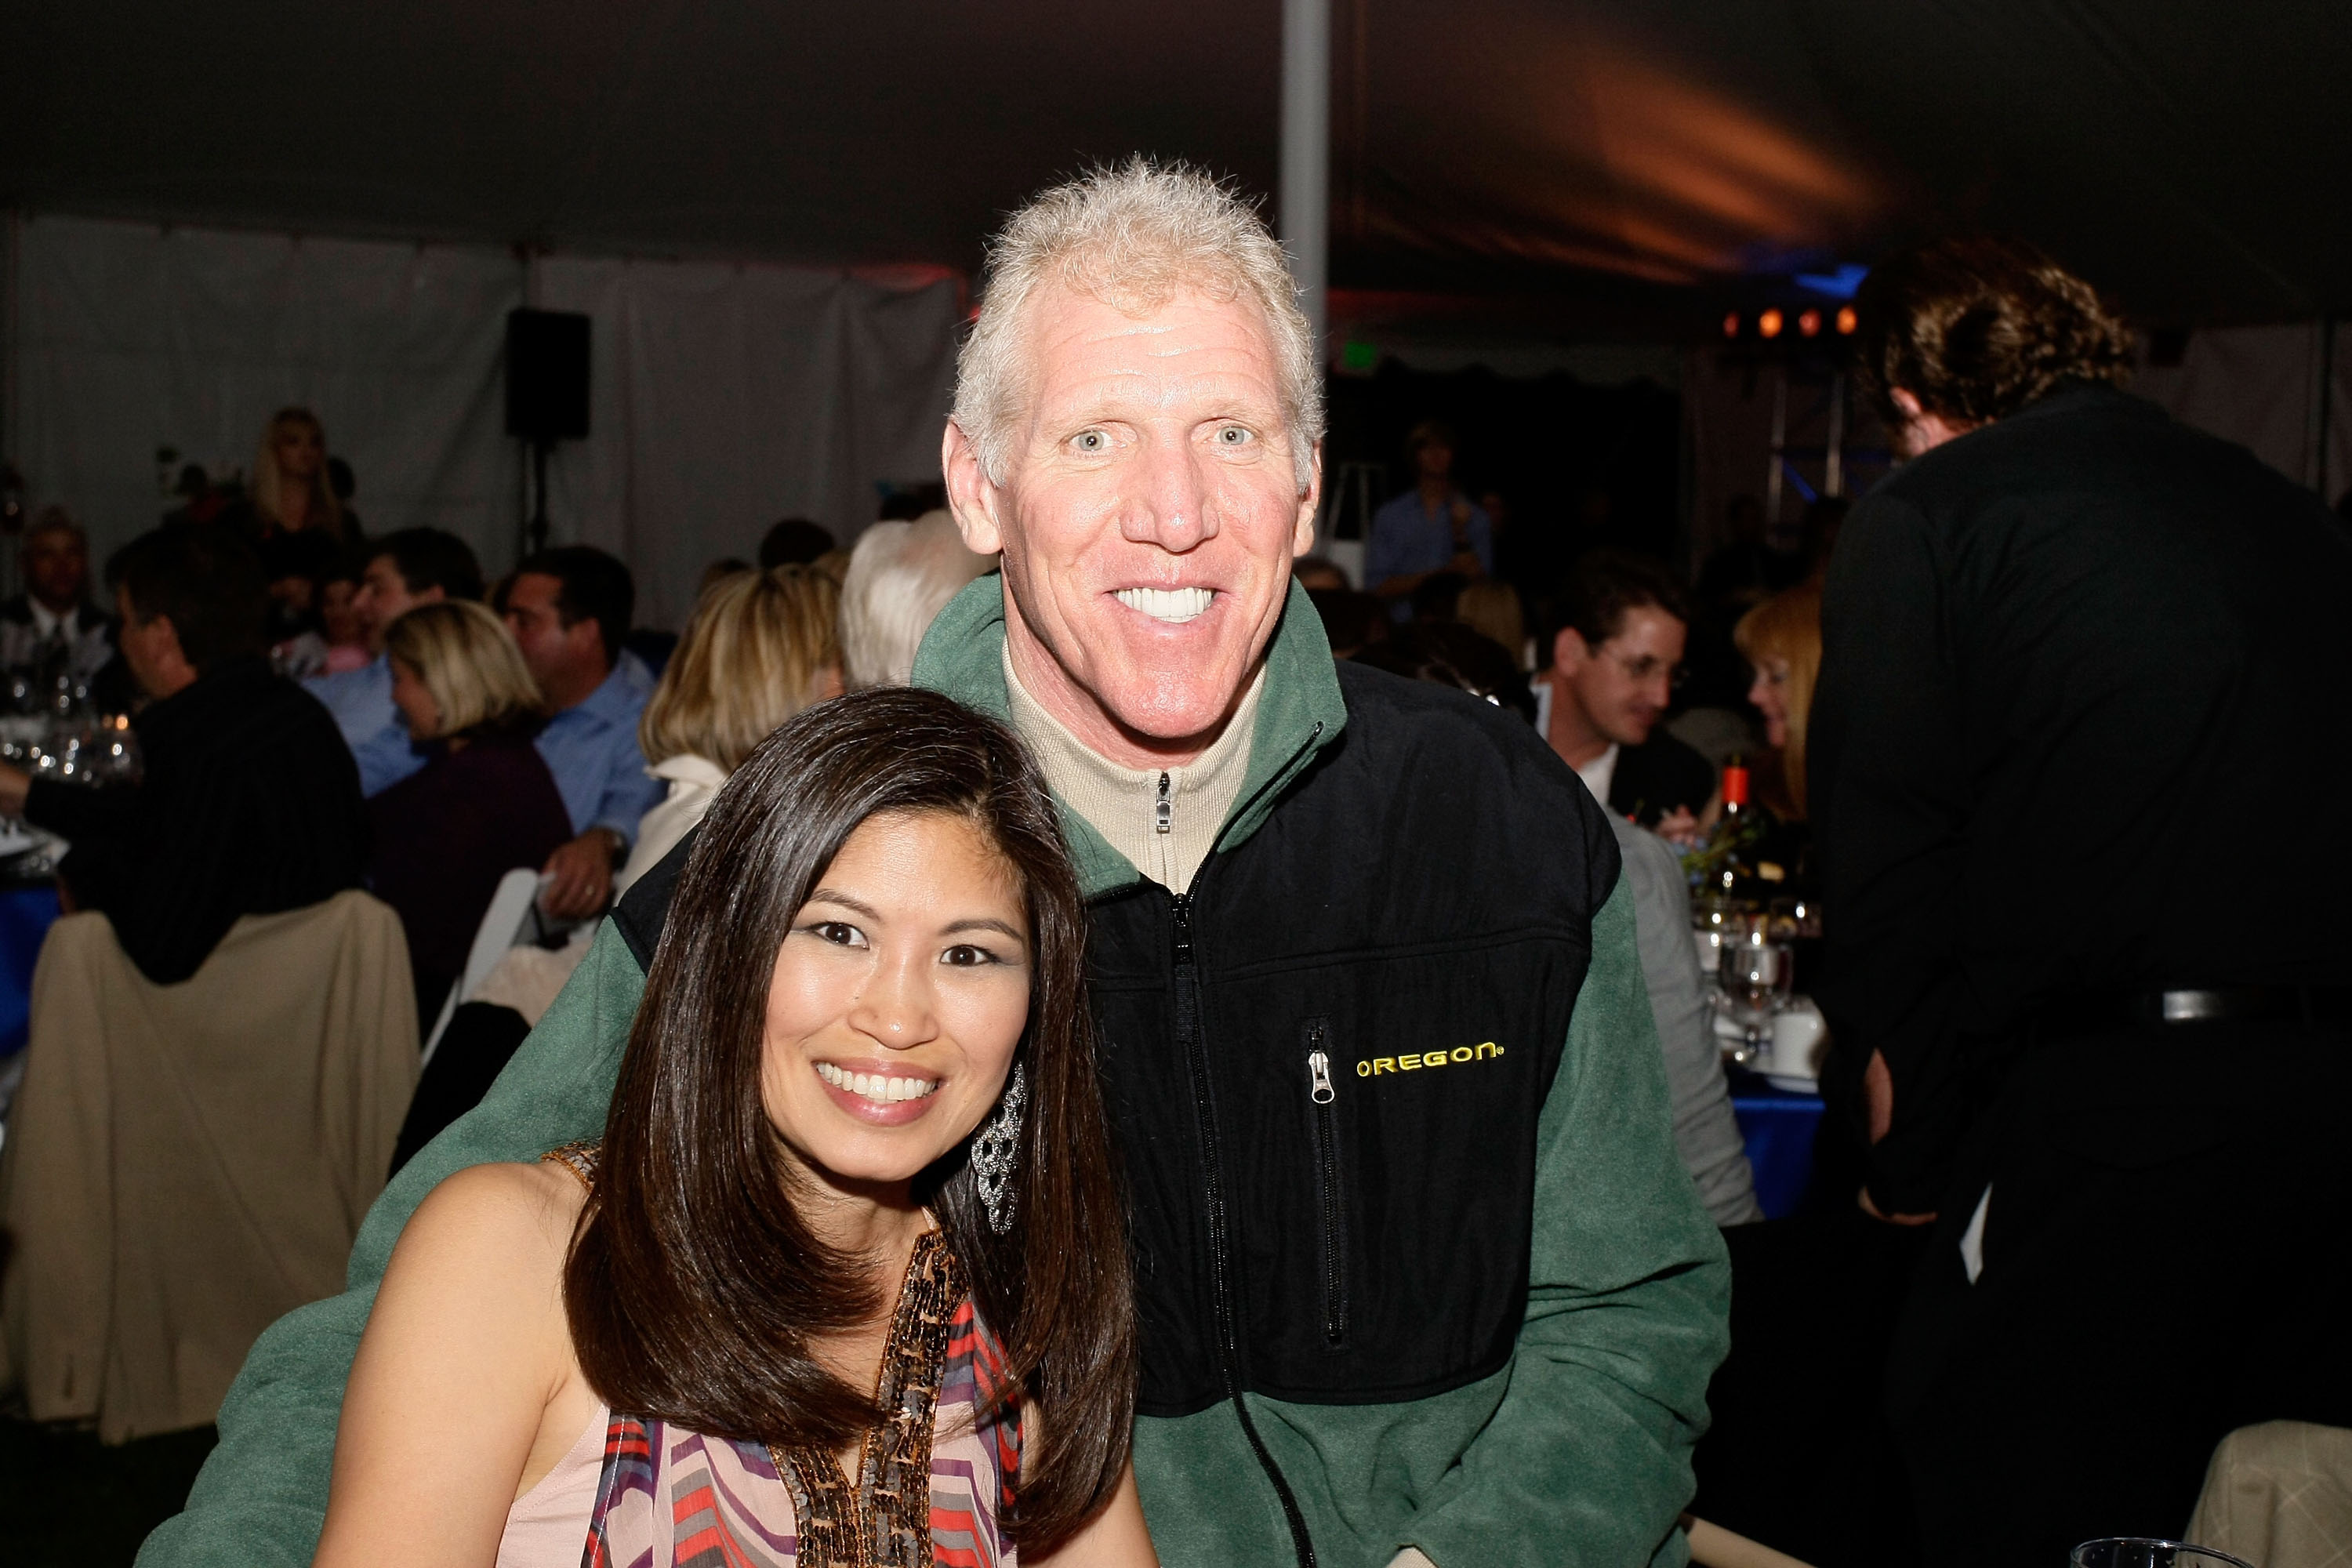 Lori Matsuoka and Bill Walton at a private concert on October 6, 2010 in San Diego, California. | Source: Getty Images